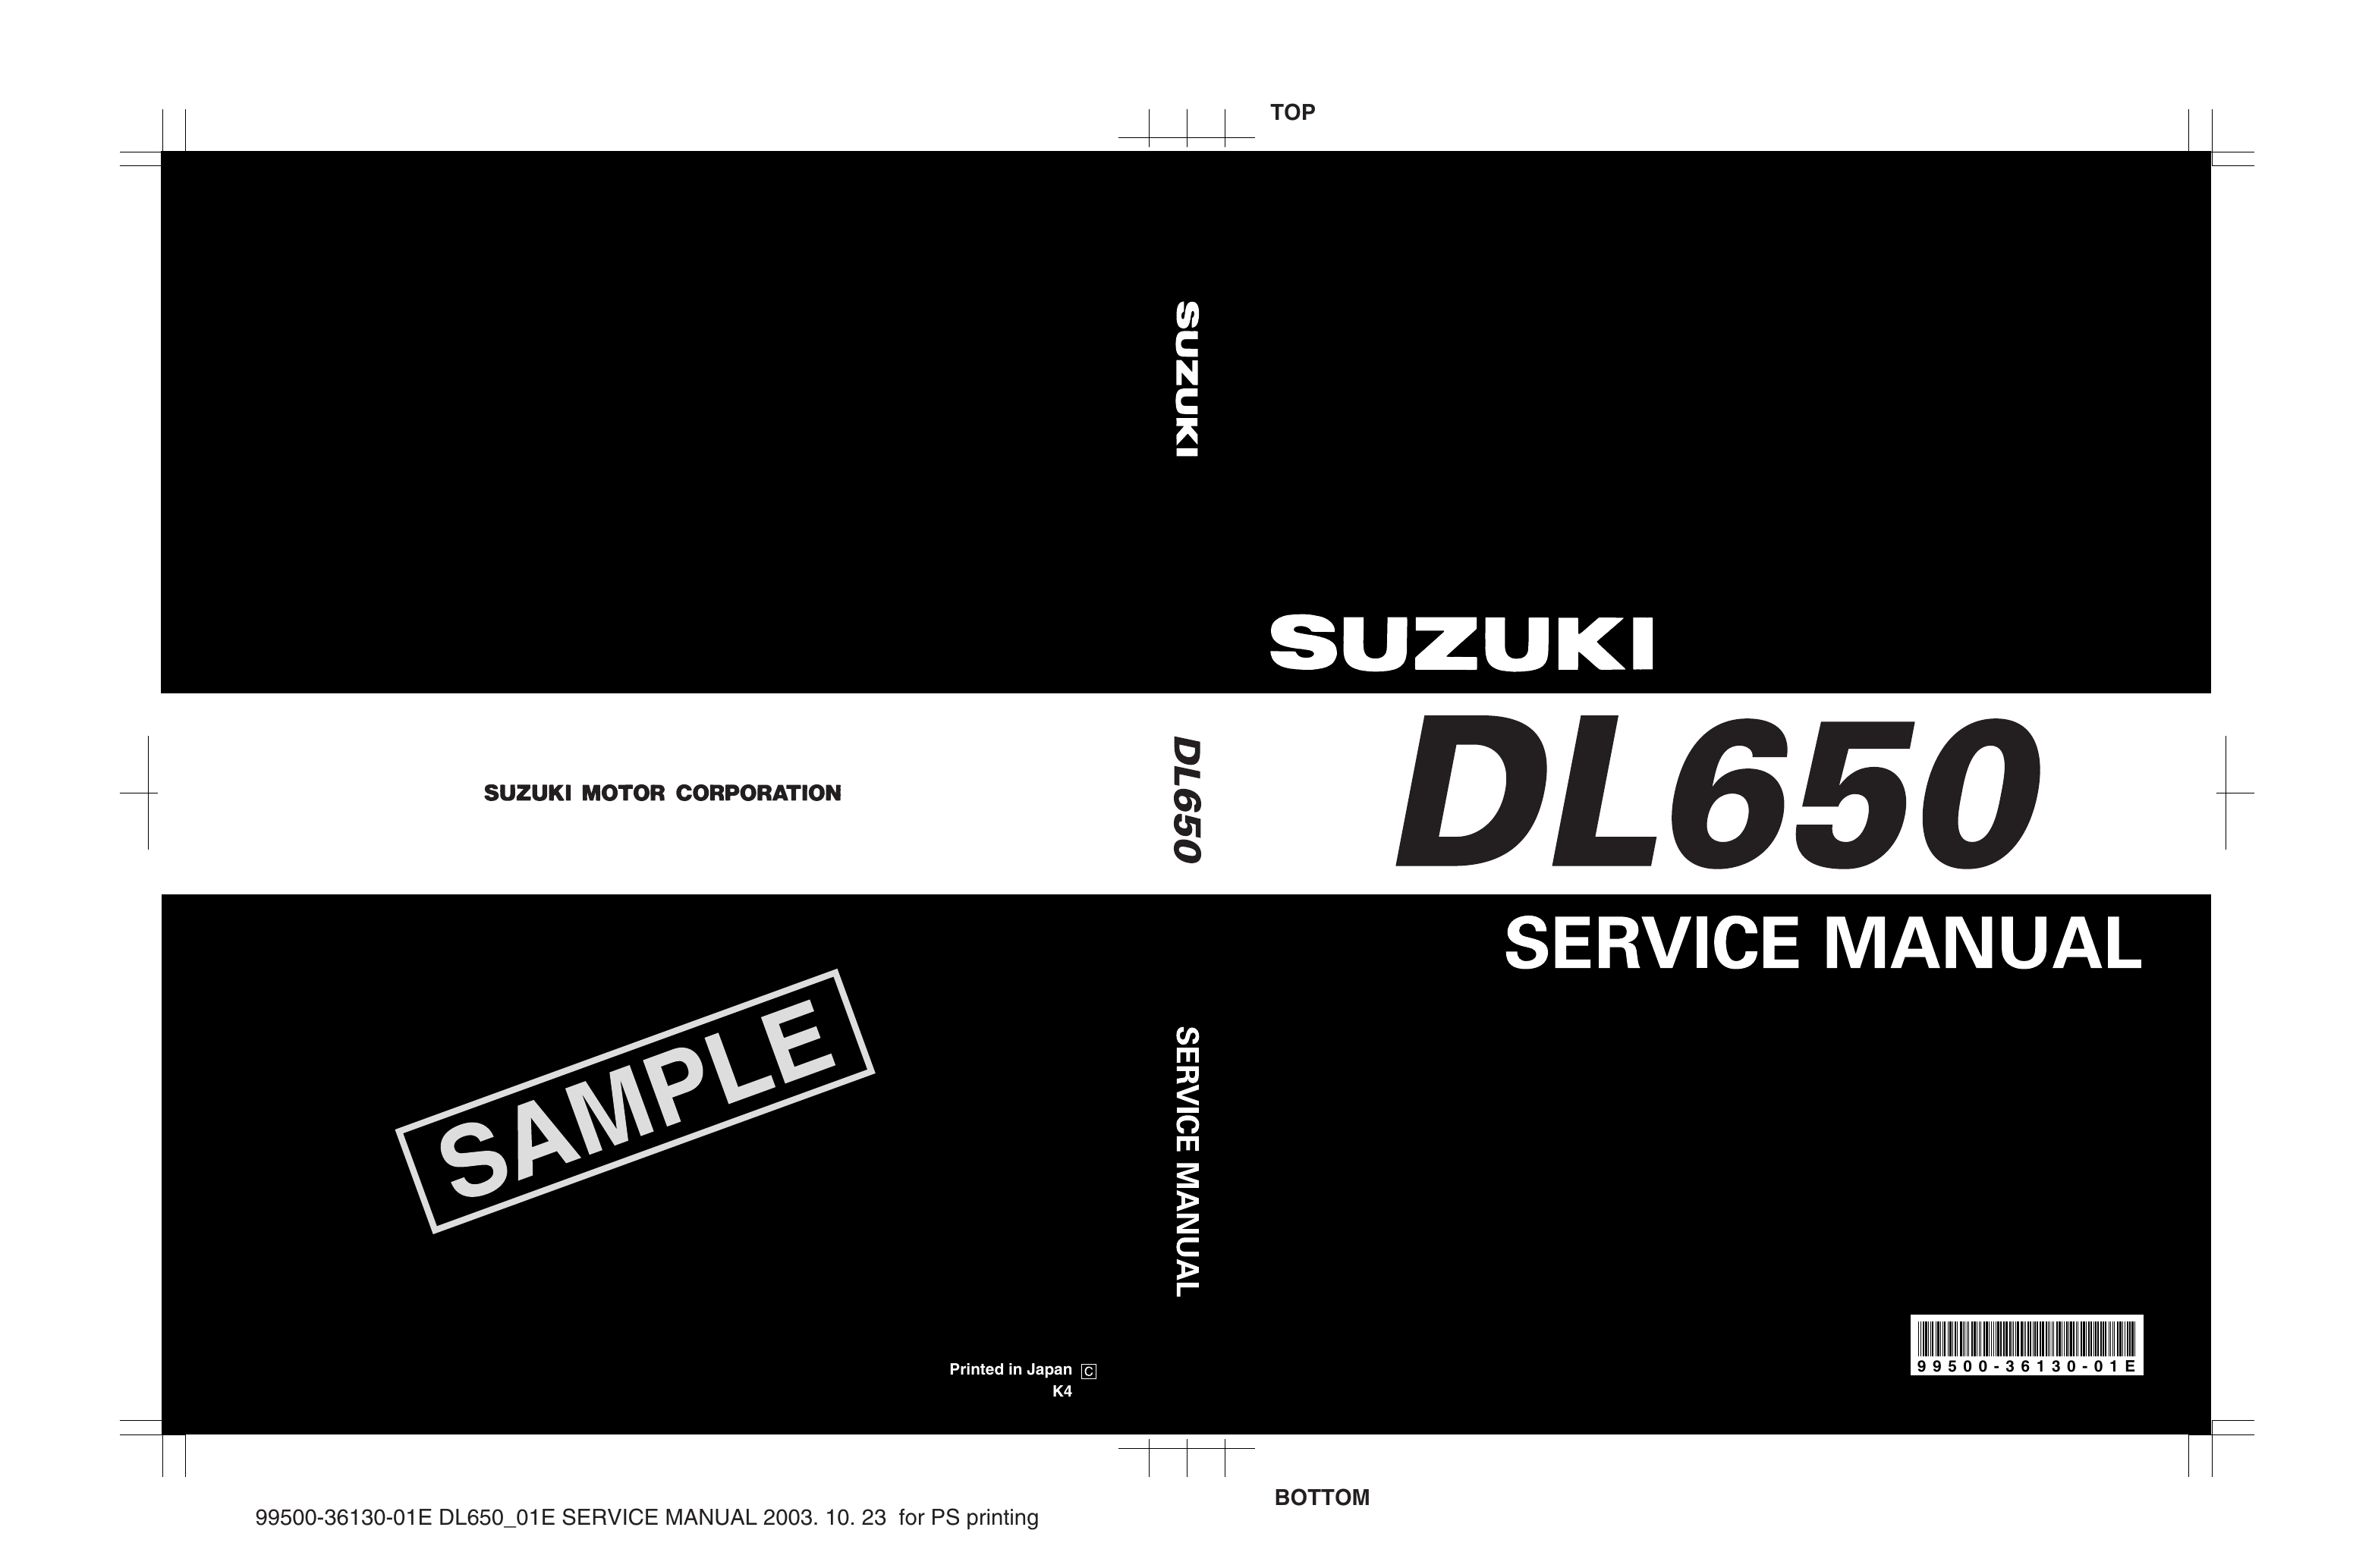 2004-2008 Suzuki DL650 V-Strom repair, service and shop manual Preview image 1